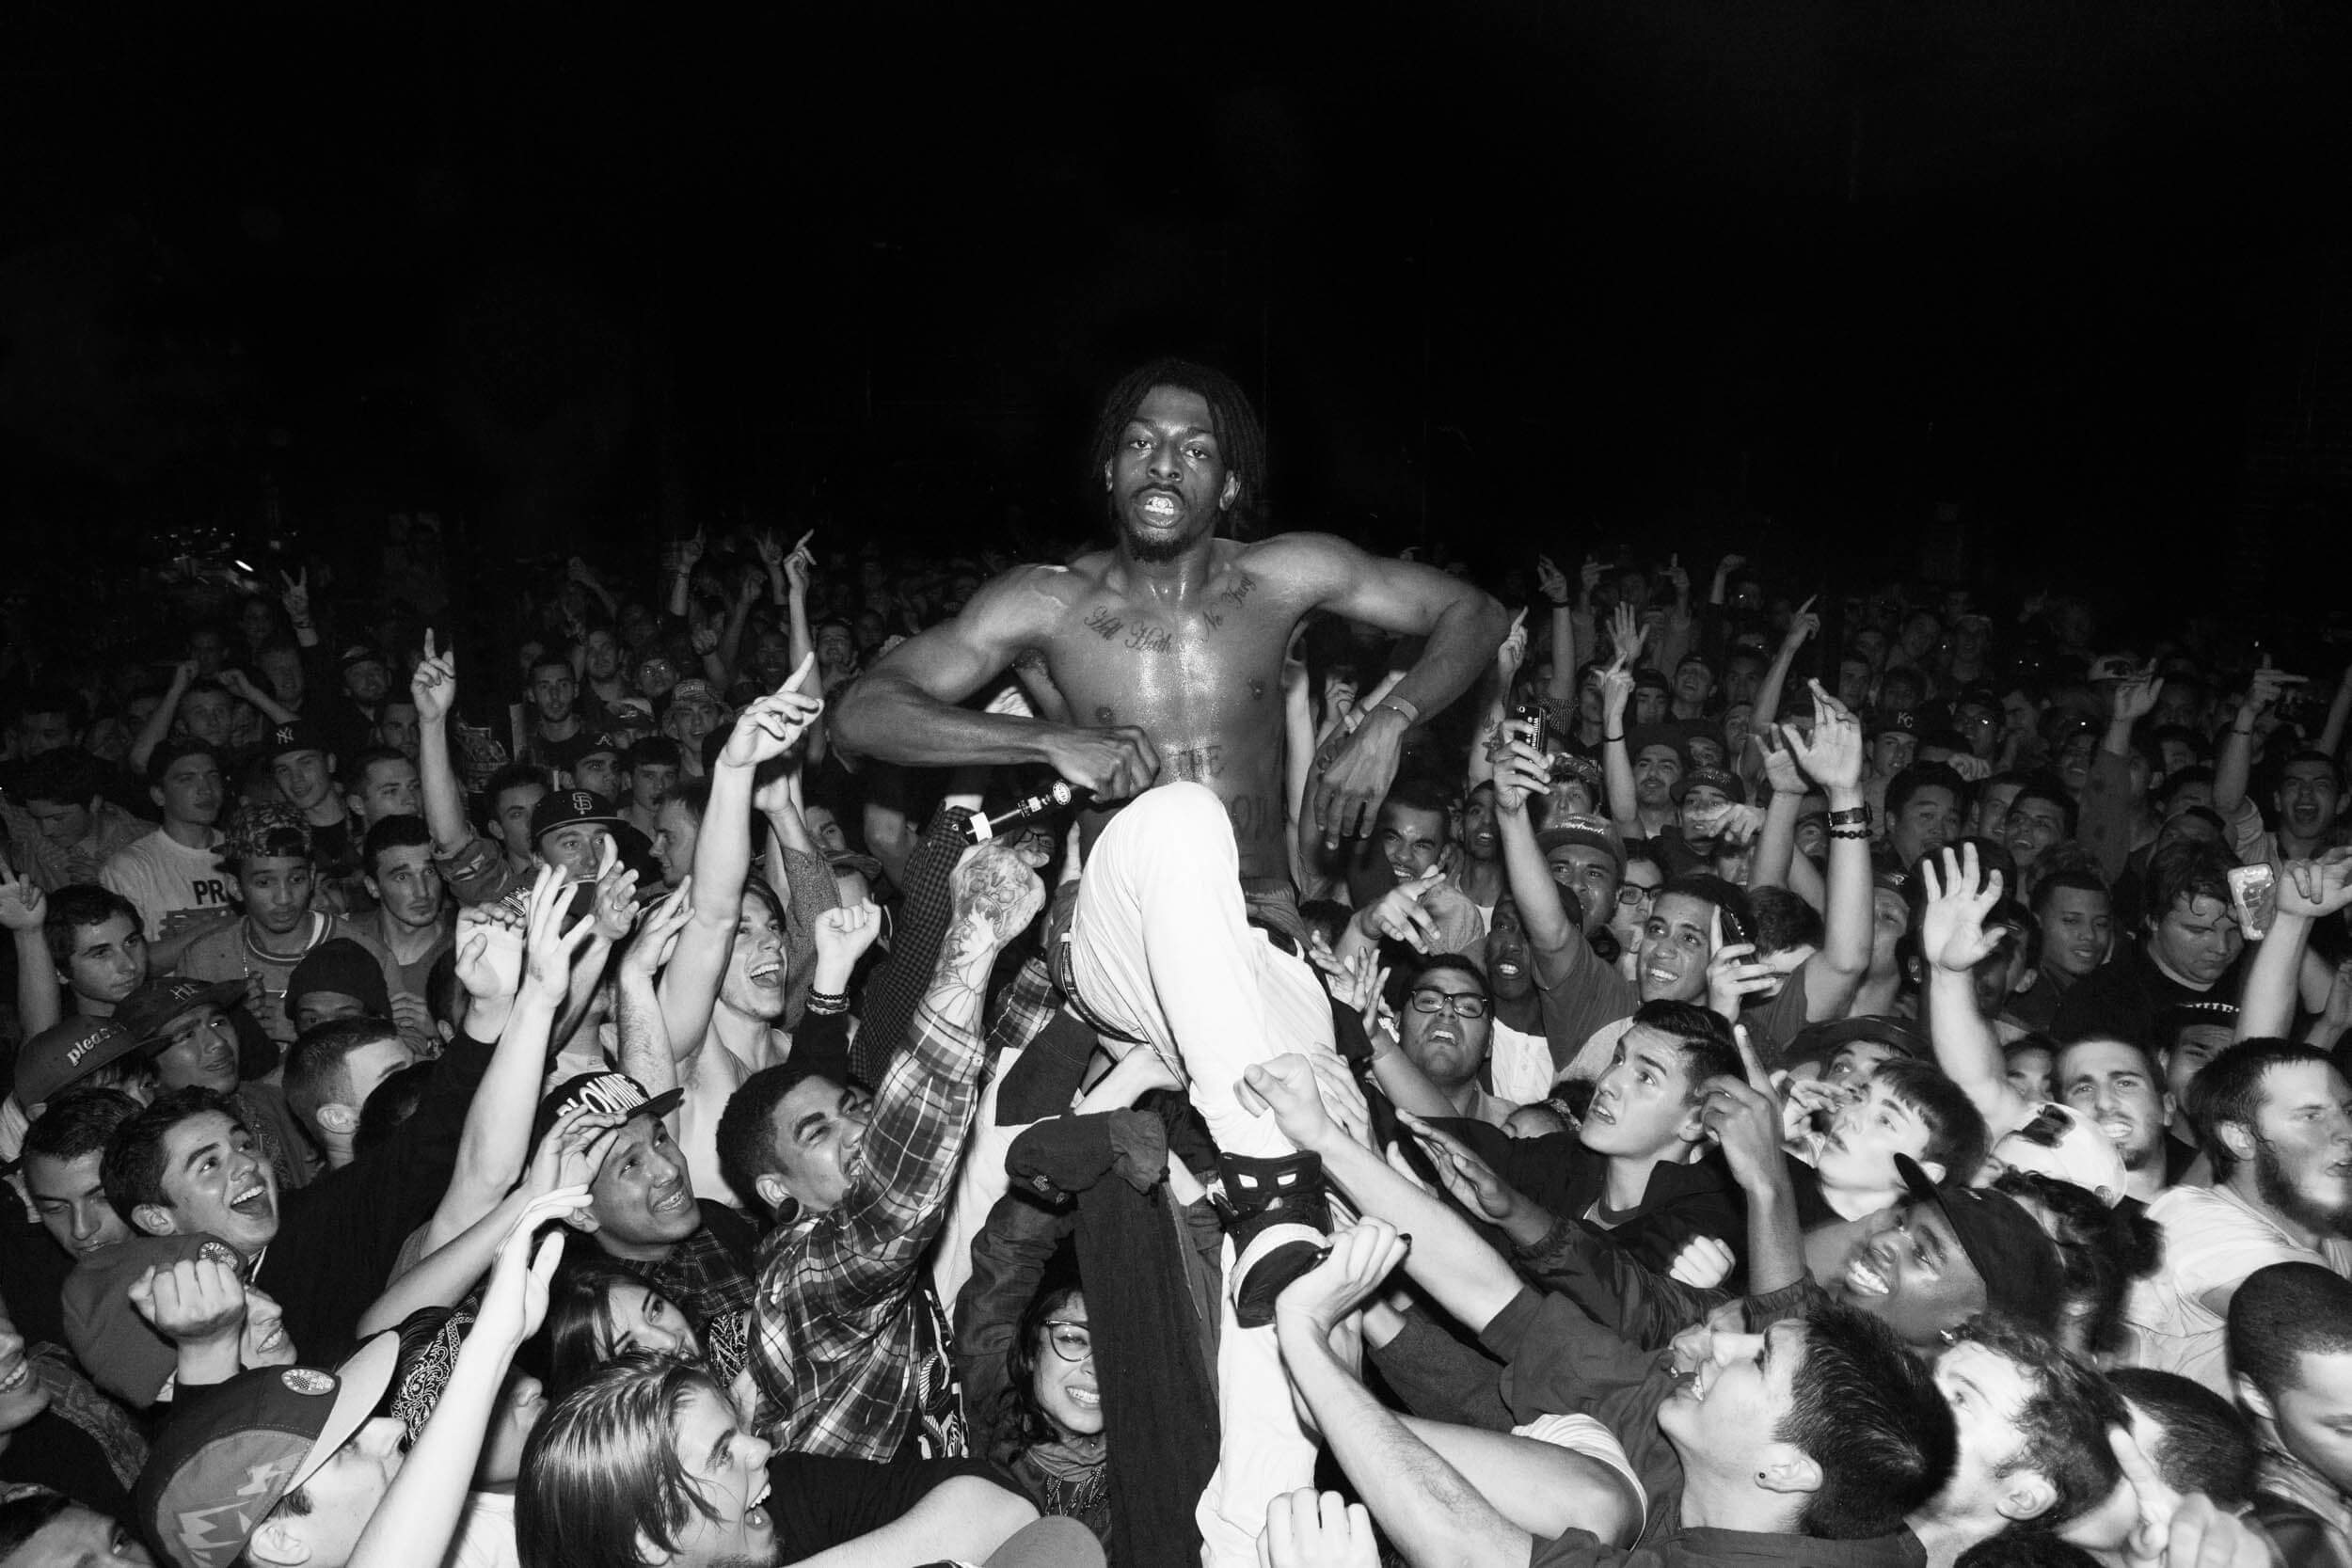 San Fransisco, California -MARCH 27th, 2013: Meechy Darko of The Flatbush Zombies, rests on the crowd after stage diving during his set at Slim's on the BEASTCOASTAL tour, his groups first full US tour.  CREDIT: Jessica Lehrman for The New York Times